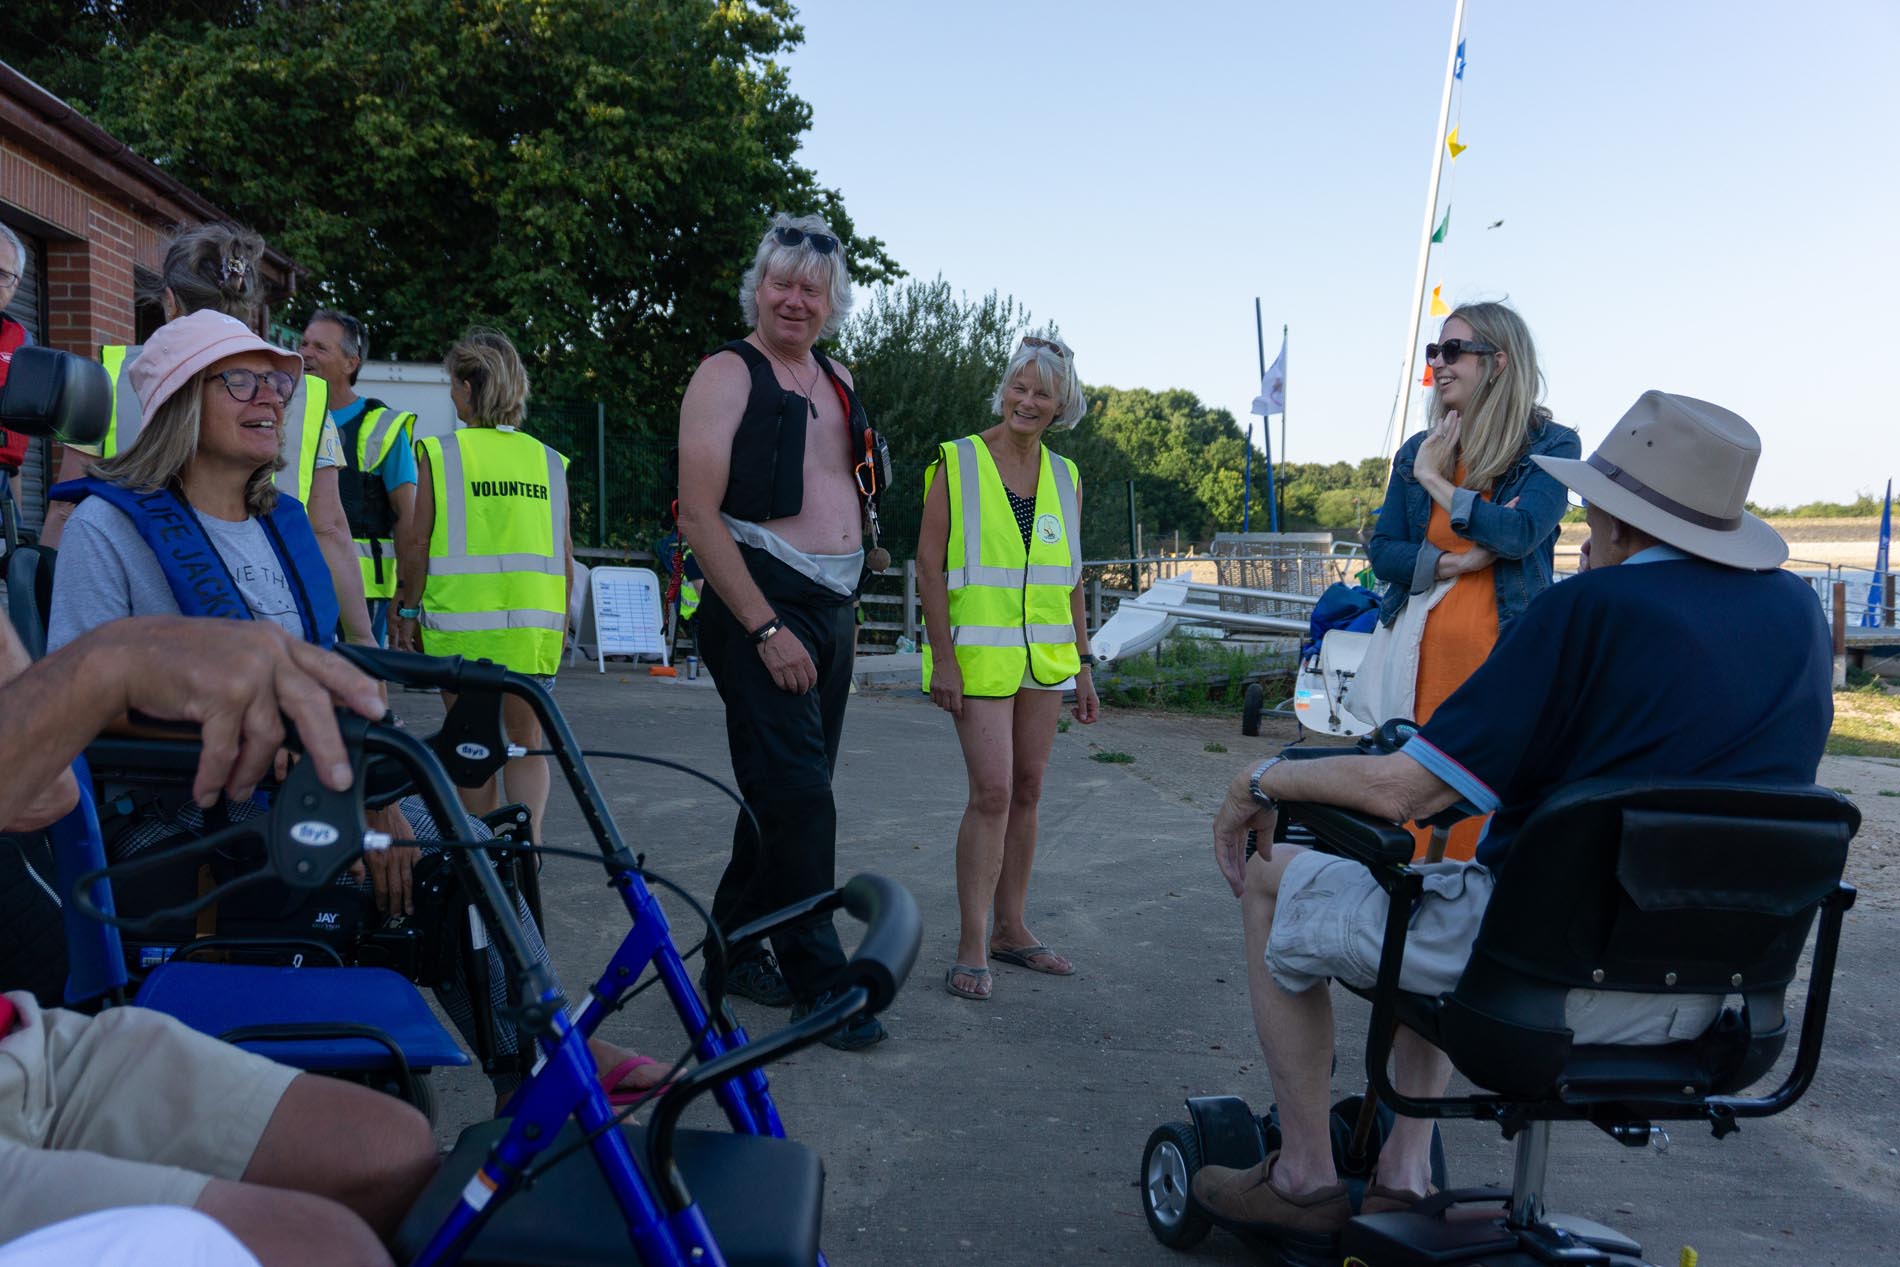 Sailability Session & Barbecue - Friday 12th August 2022